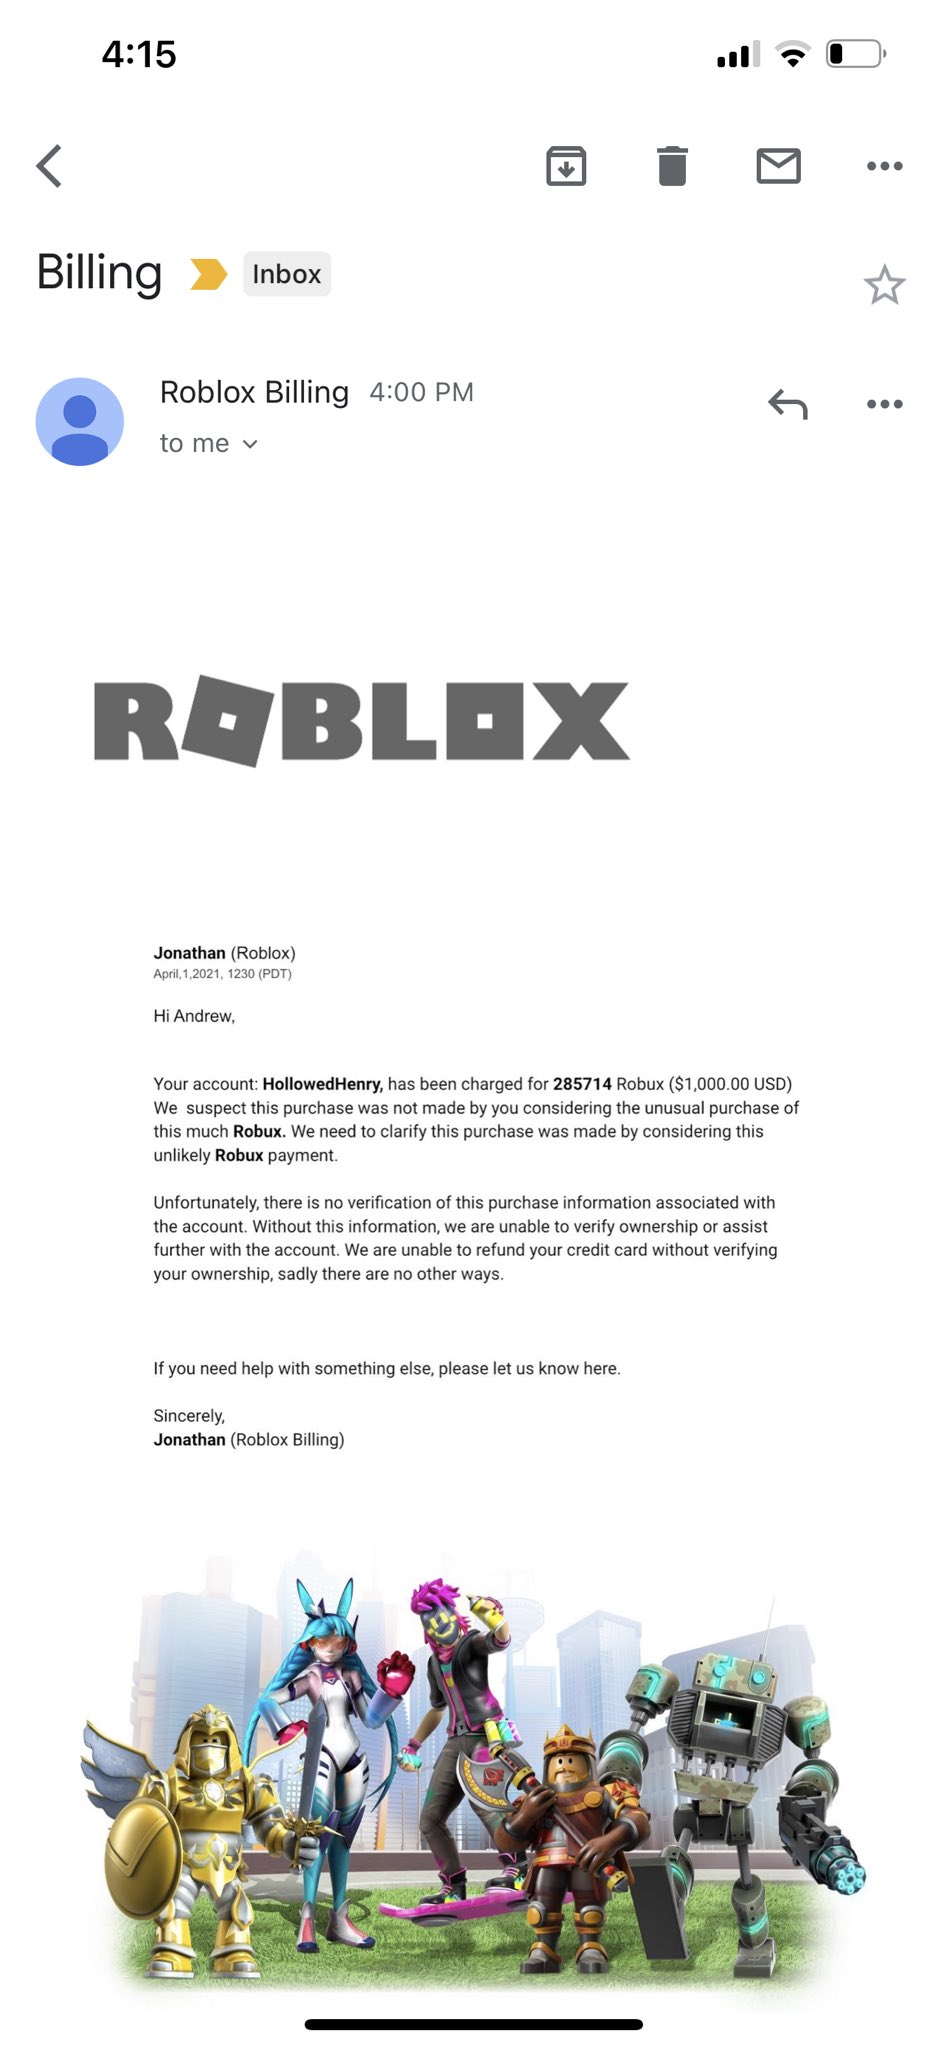 Andrew Ross Sorkin On Twitter My Kids Just Played A Pretty Sophisticated April Fools Joke On Me I Totally Fell For It They Sent Me This Email From Roblox Saying My - how to get robux using a fake creditcard